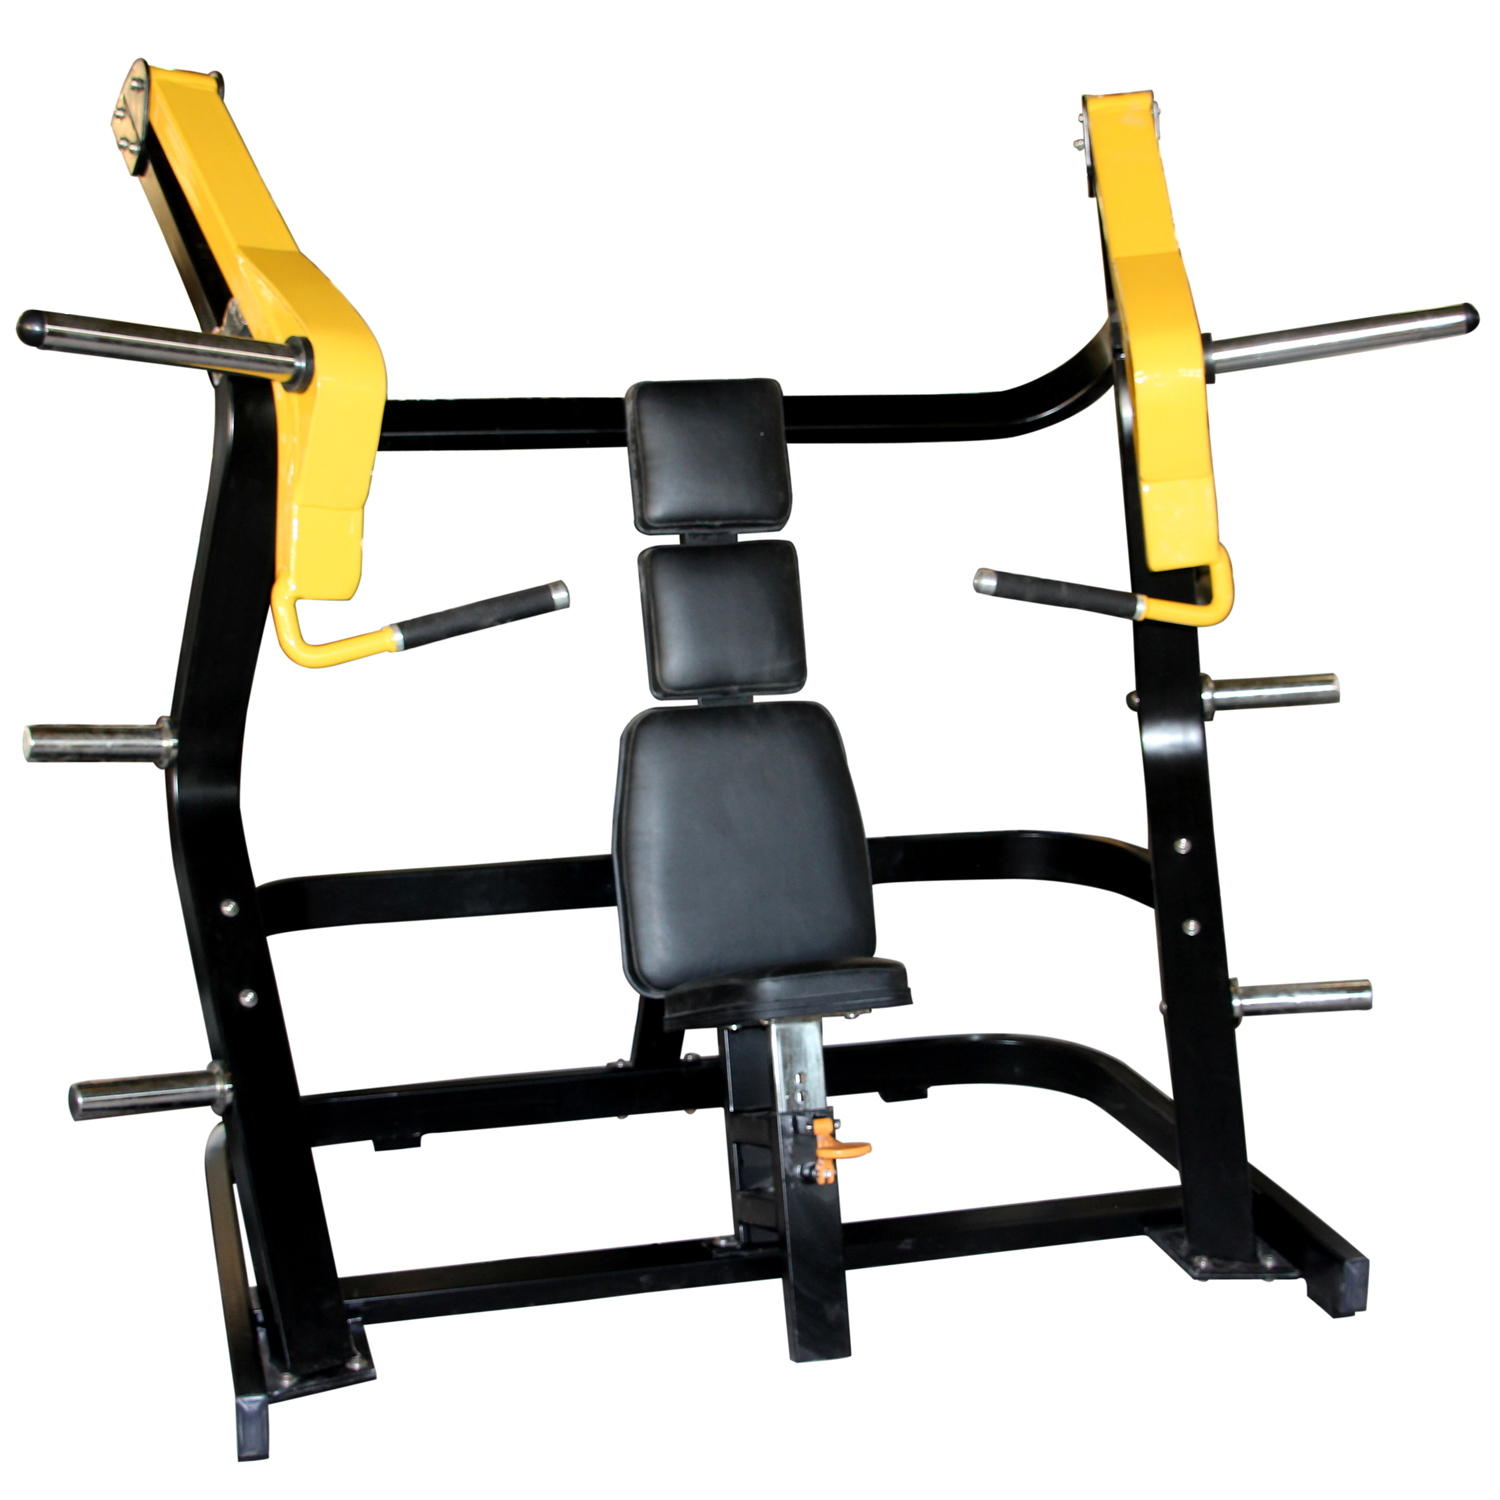 Biceps Triceps Curl Arm Cycle Exercise Machine Multi Gym Equipment